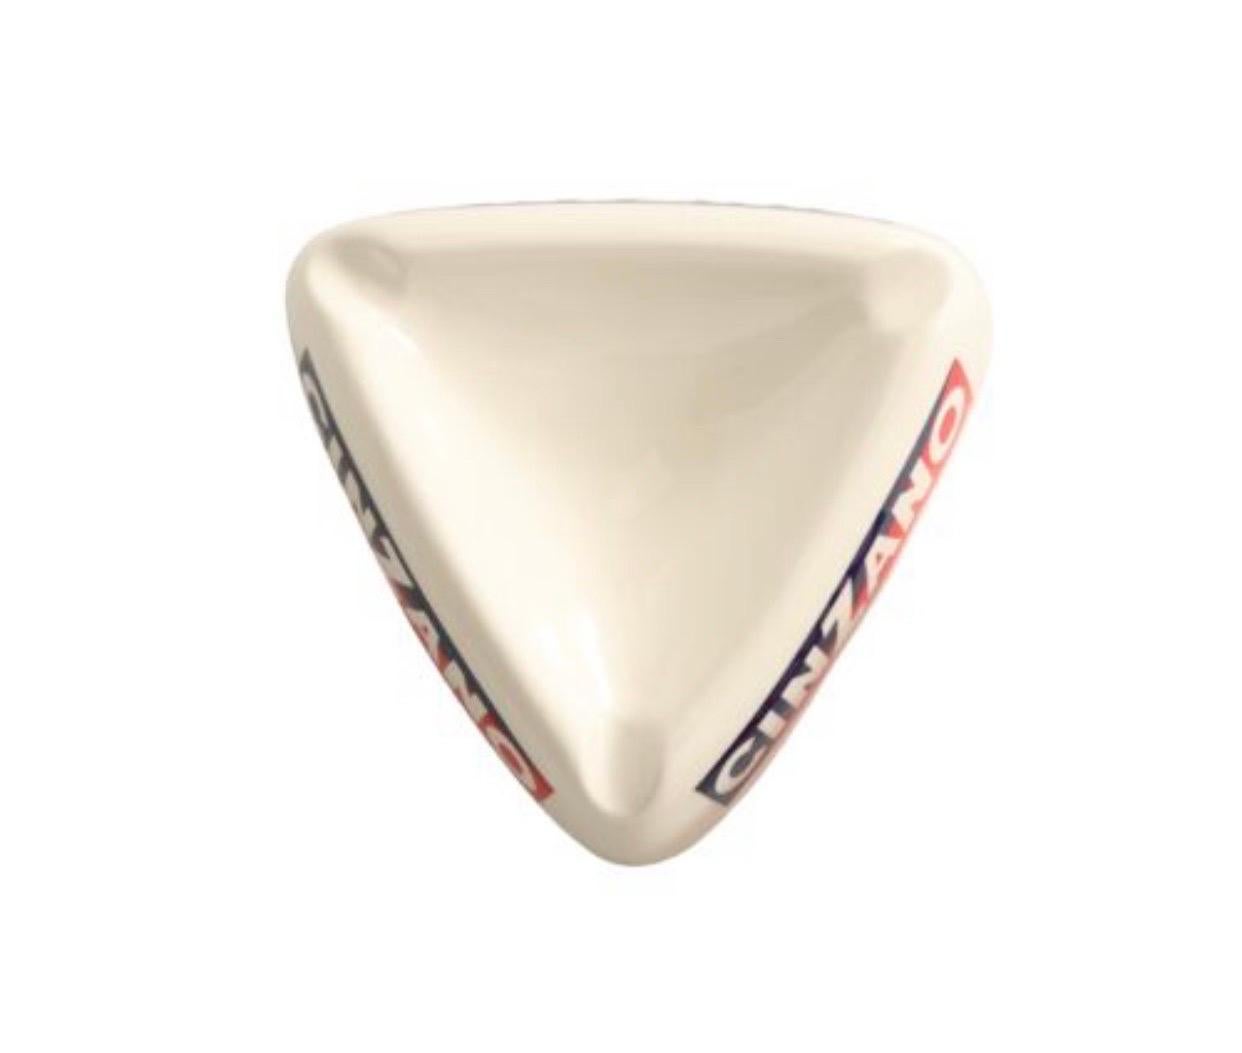 A triangular ceramic ashtray with the distinctive Cinzano logo in red, white and blue on all three sides, and a cigarette rest at each corner.
 